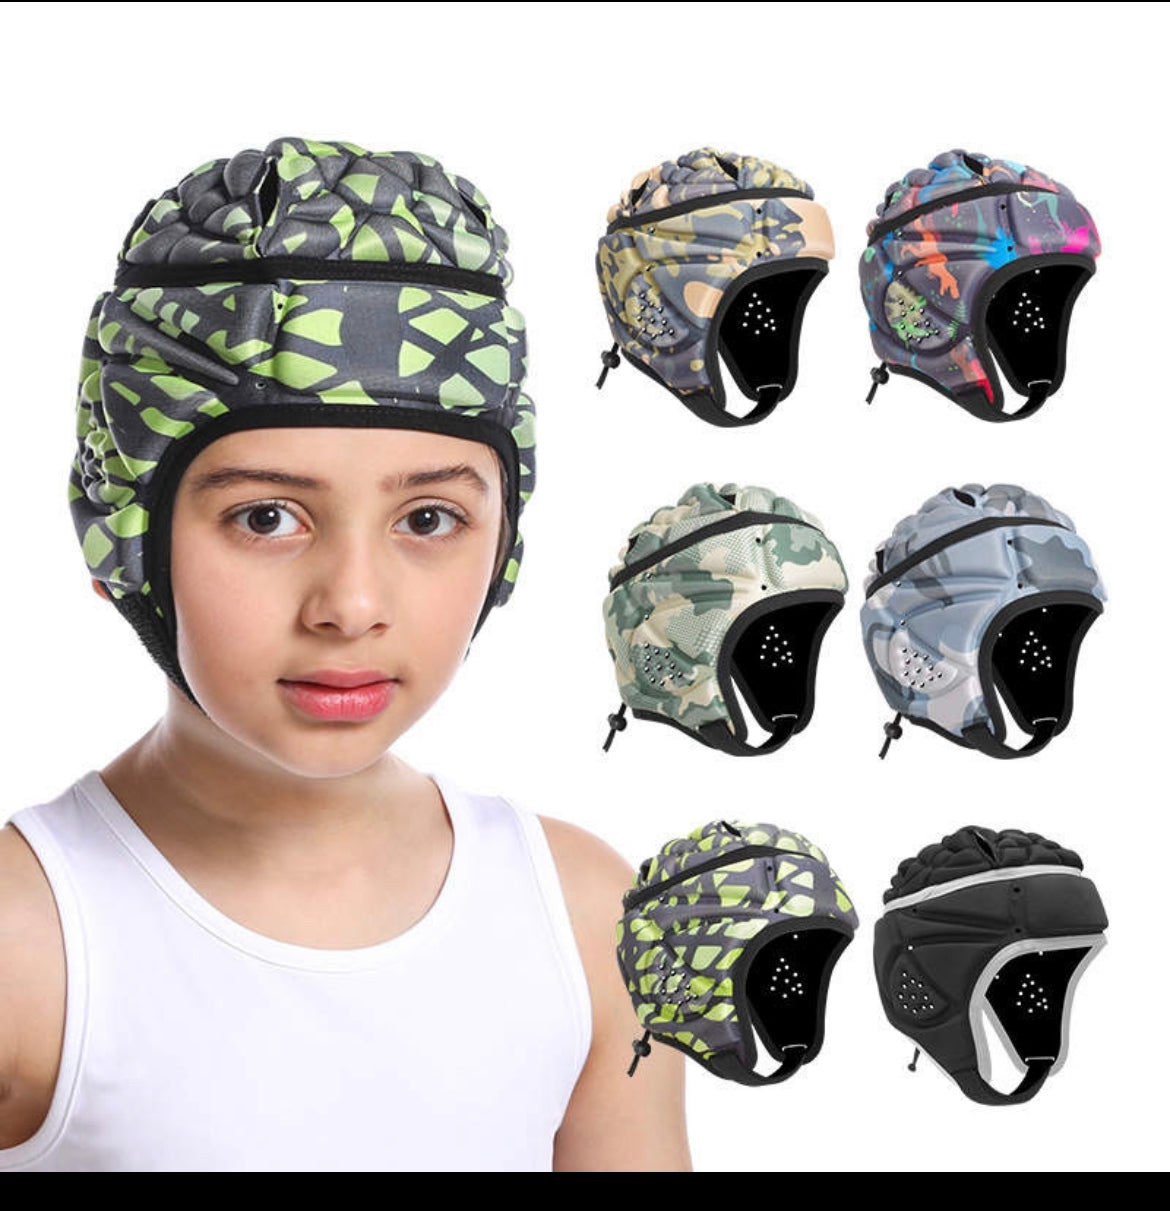 Sports Head Guards, Ages 6 - 16 years Protective Headgear, Padded Scrum Cap Helmet for Head Protection for Rugby